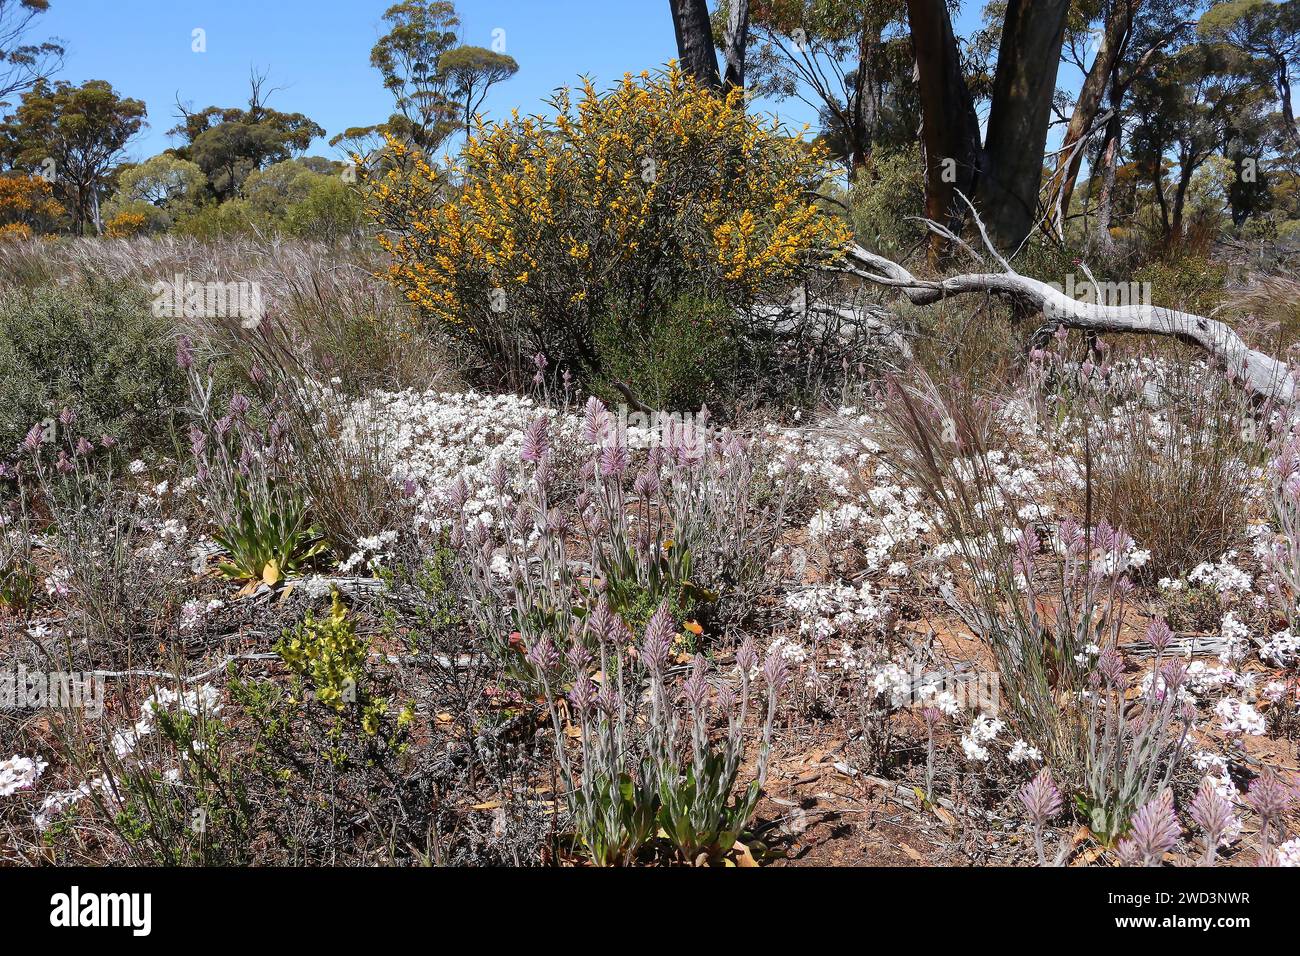 Spring in the Western Australian outback when endemic wildflowers as Mulla mulla, white everlasting daisies and a yellow wattle bush are abloom Stock Photo